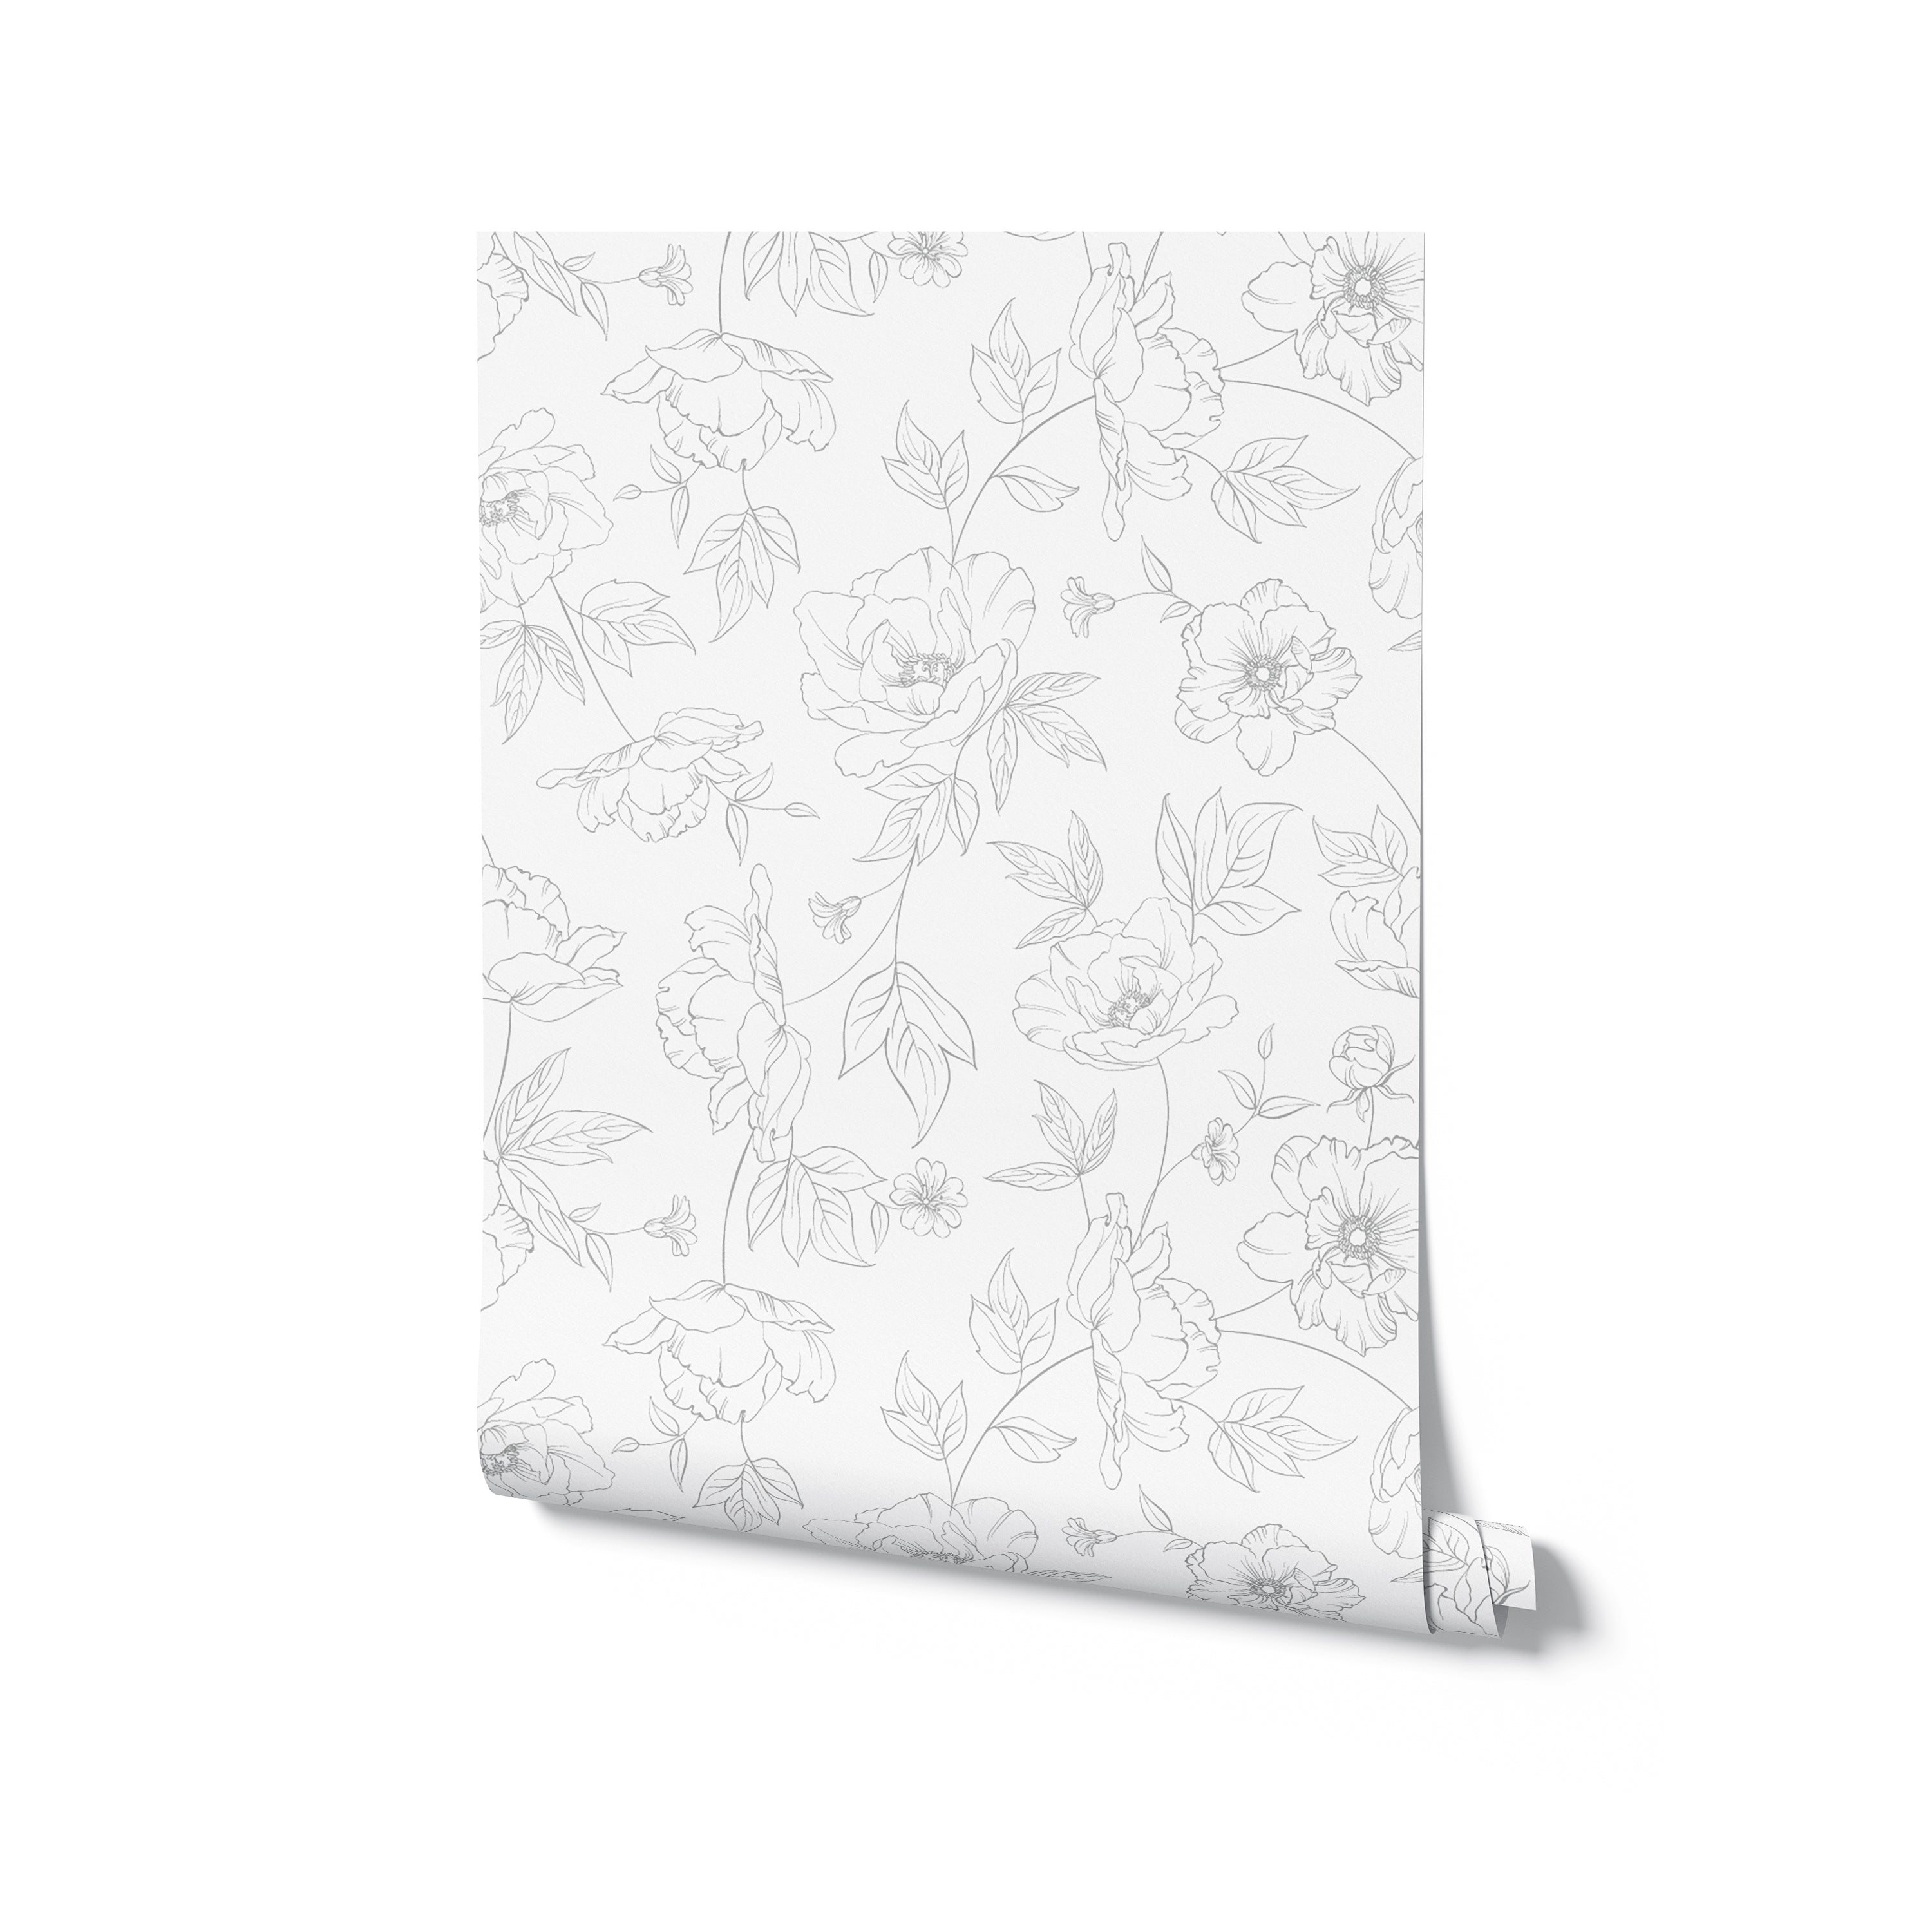 Close-up of a rolled Dainty Floral Line Wallpaper with intricate line-drawn flowers, ready to transform any room with its subtle charm